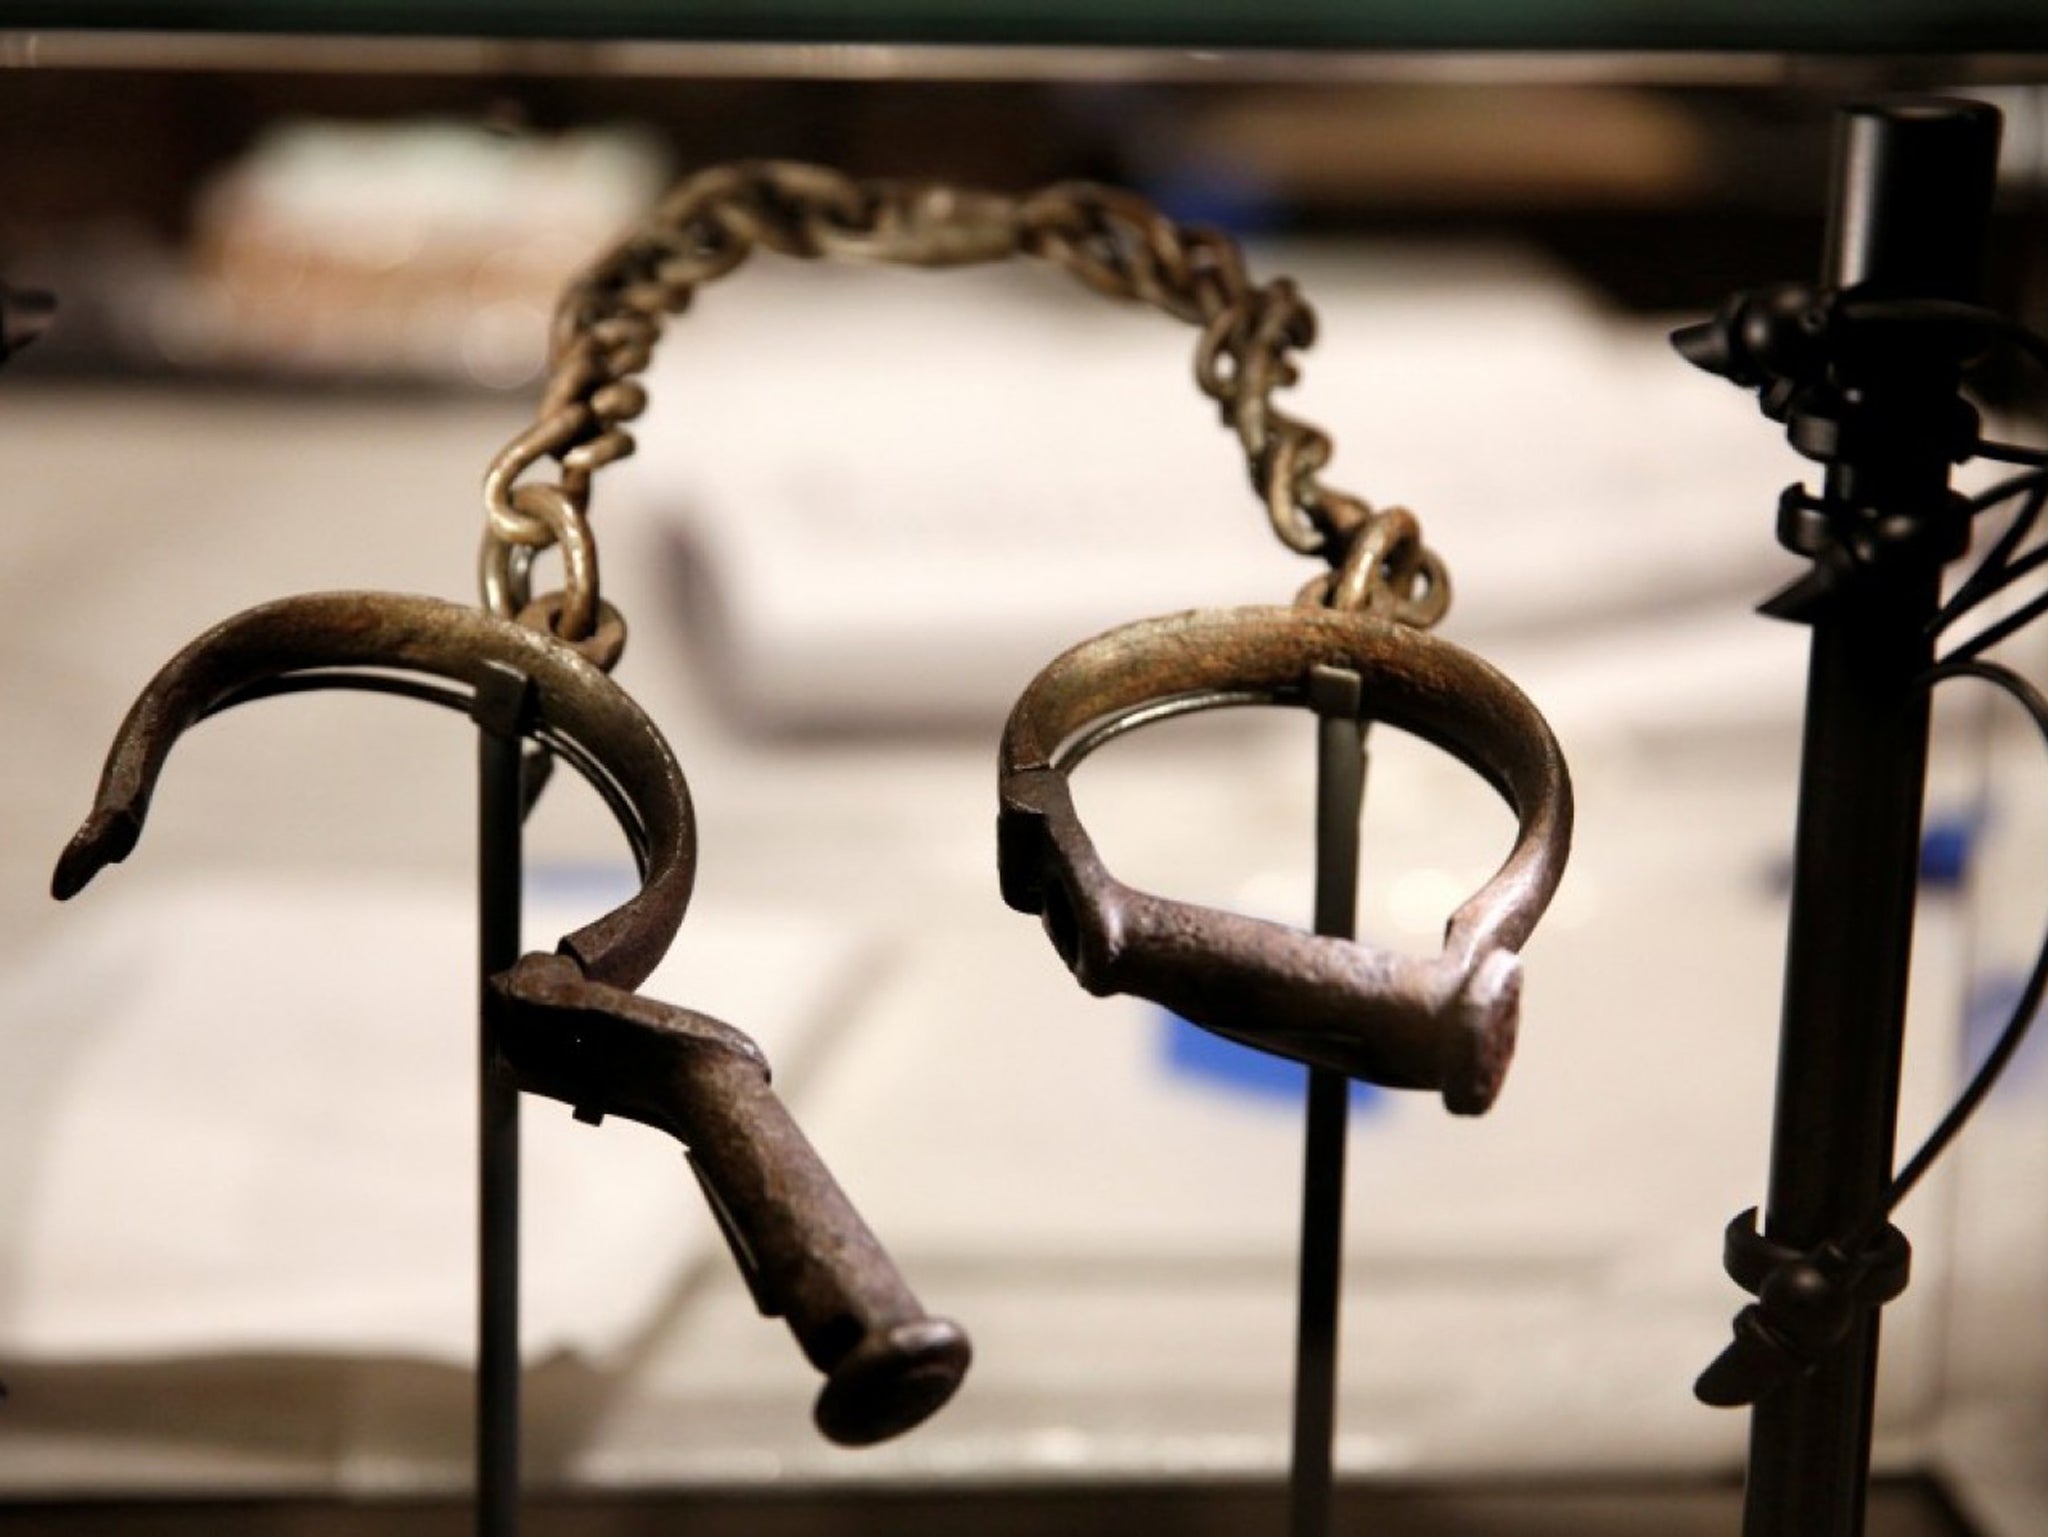 Slave shackles on display at the new National Museum of African American History and Culture in Washington